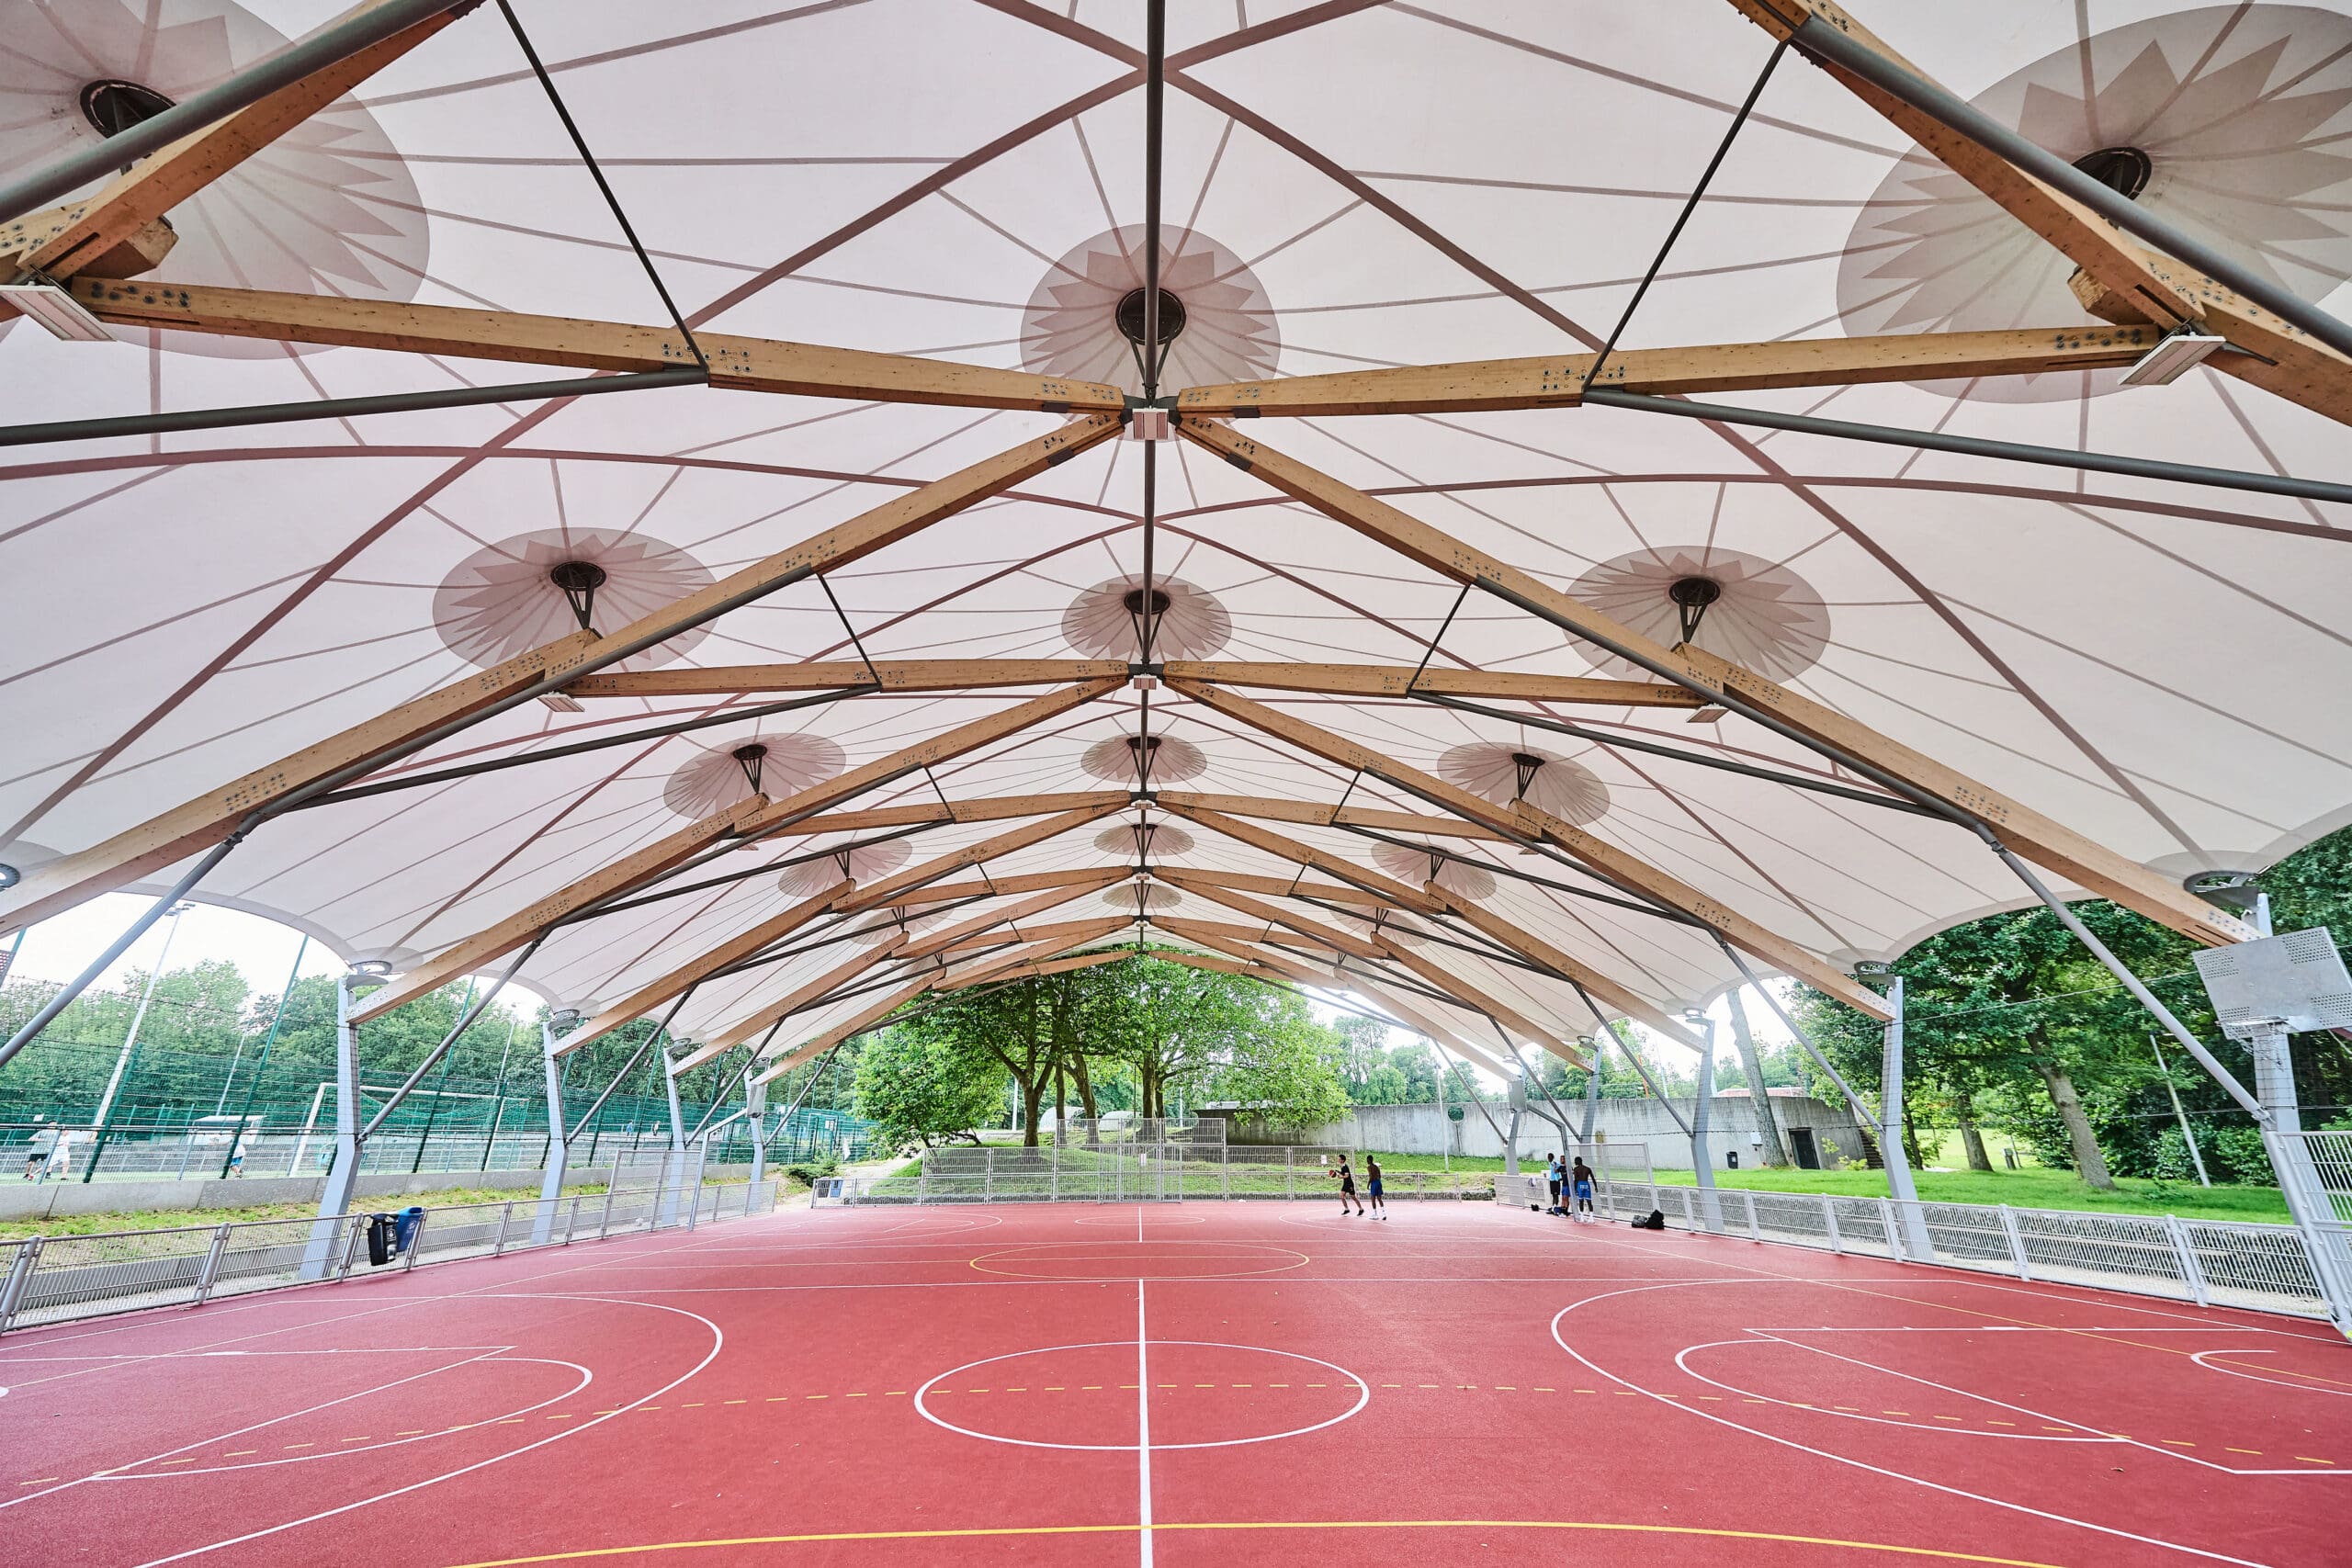 NOH – An Innovative Cover for a Basketball Court